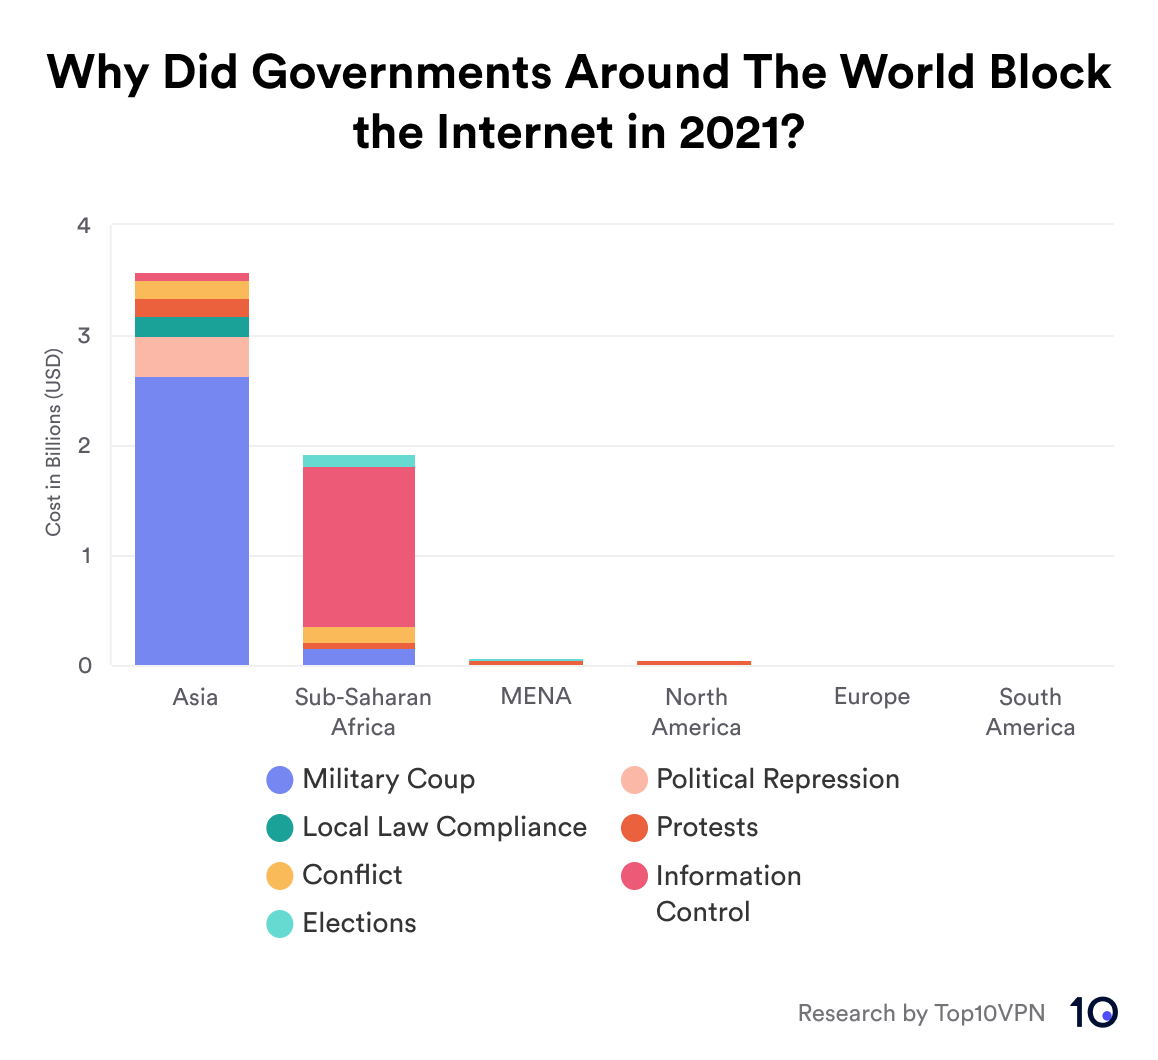 Bar chart showing the most expensive reasons for internet shutdowns in 2021 across different regions